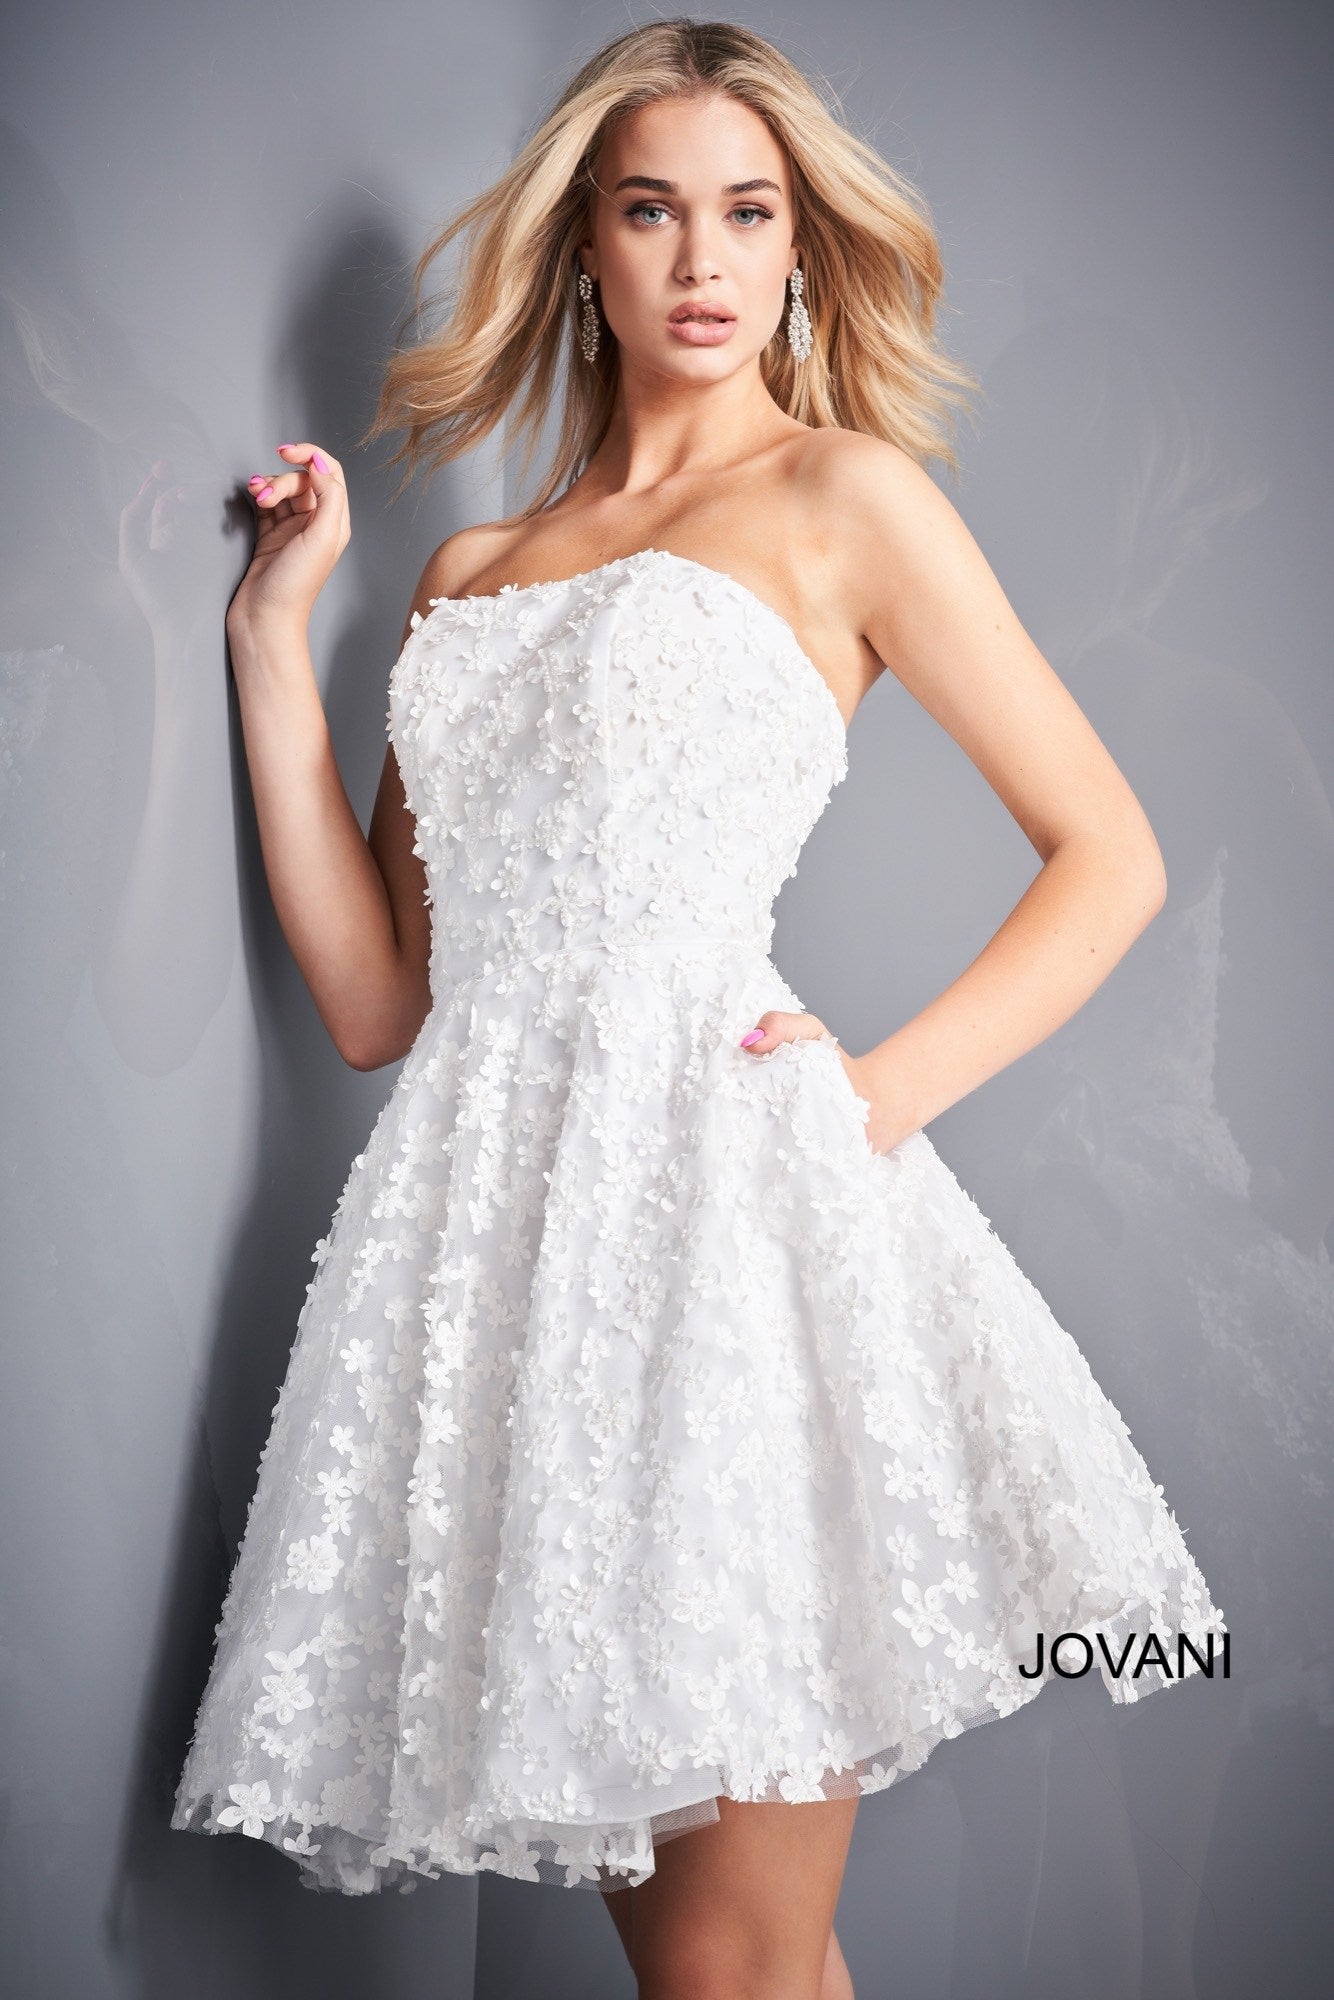 Jovani 02564 is a short Fit & Flare cocktail dress perfect for homecoming, wedding reception, prom & More! Strapless straight neckline with a fitted bodice covered in 3D floral Appliques. Pockets in the flared skirt. Corset Lace up back.  Available Sizes: 00,0,2,4,6,8,10,12,14,16,18,20,22,24  Available Colors: White